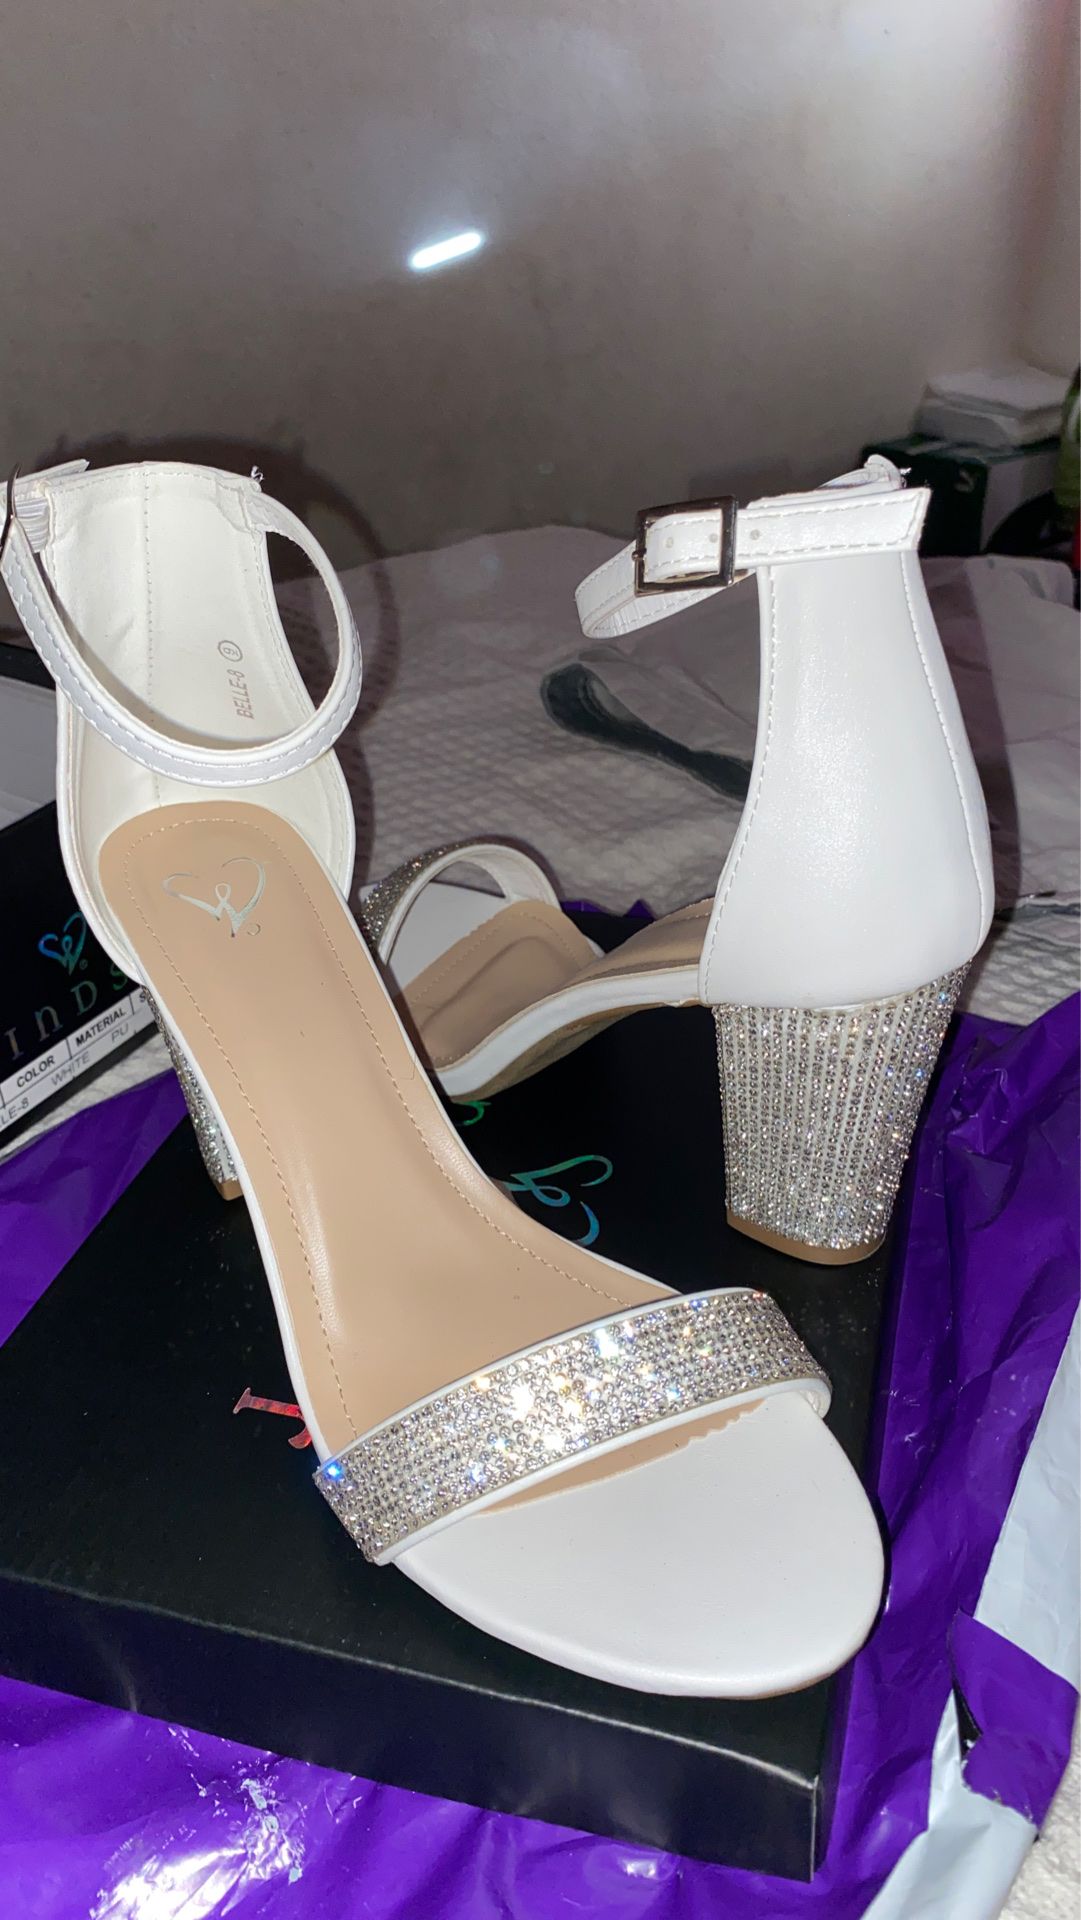 White heels for sale. Size 9 never used heel to high for me. Selling for $25 let me know if your interested.